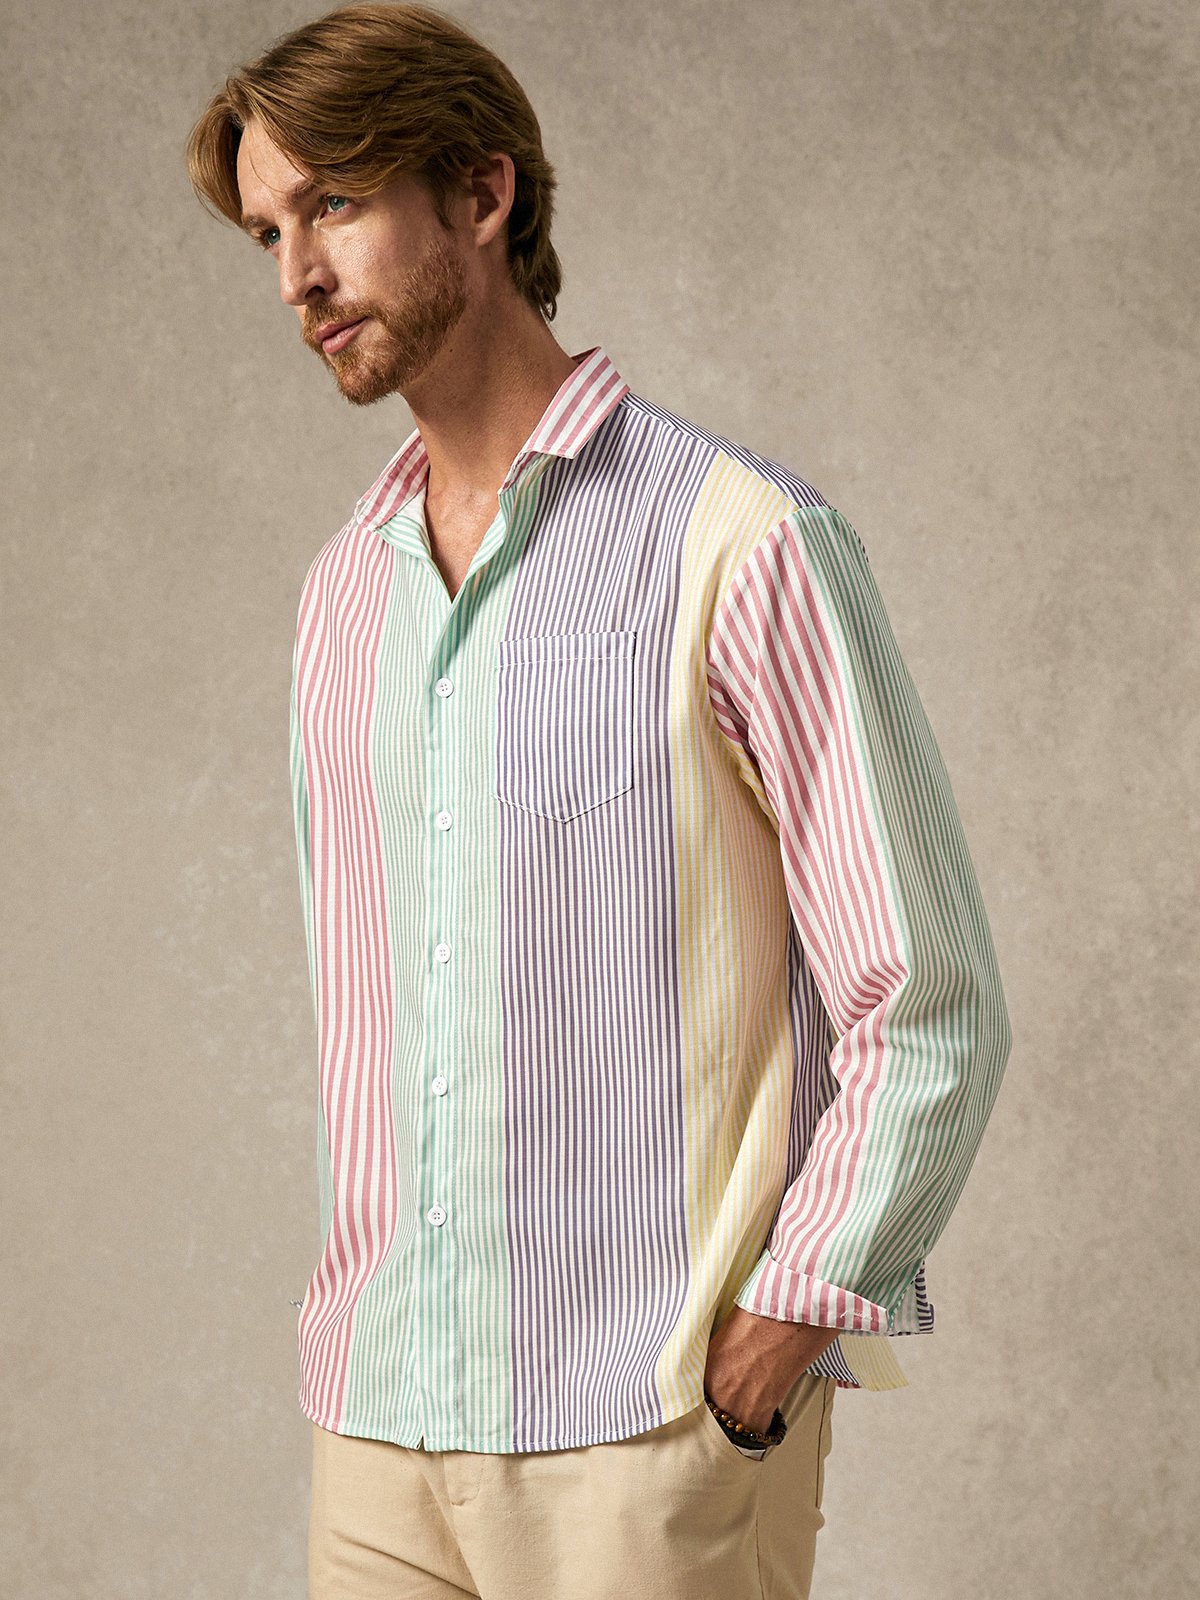 Contrast Stripes Chest Pocket Long Sleeve Casual Shirt